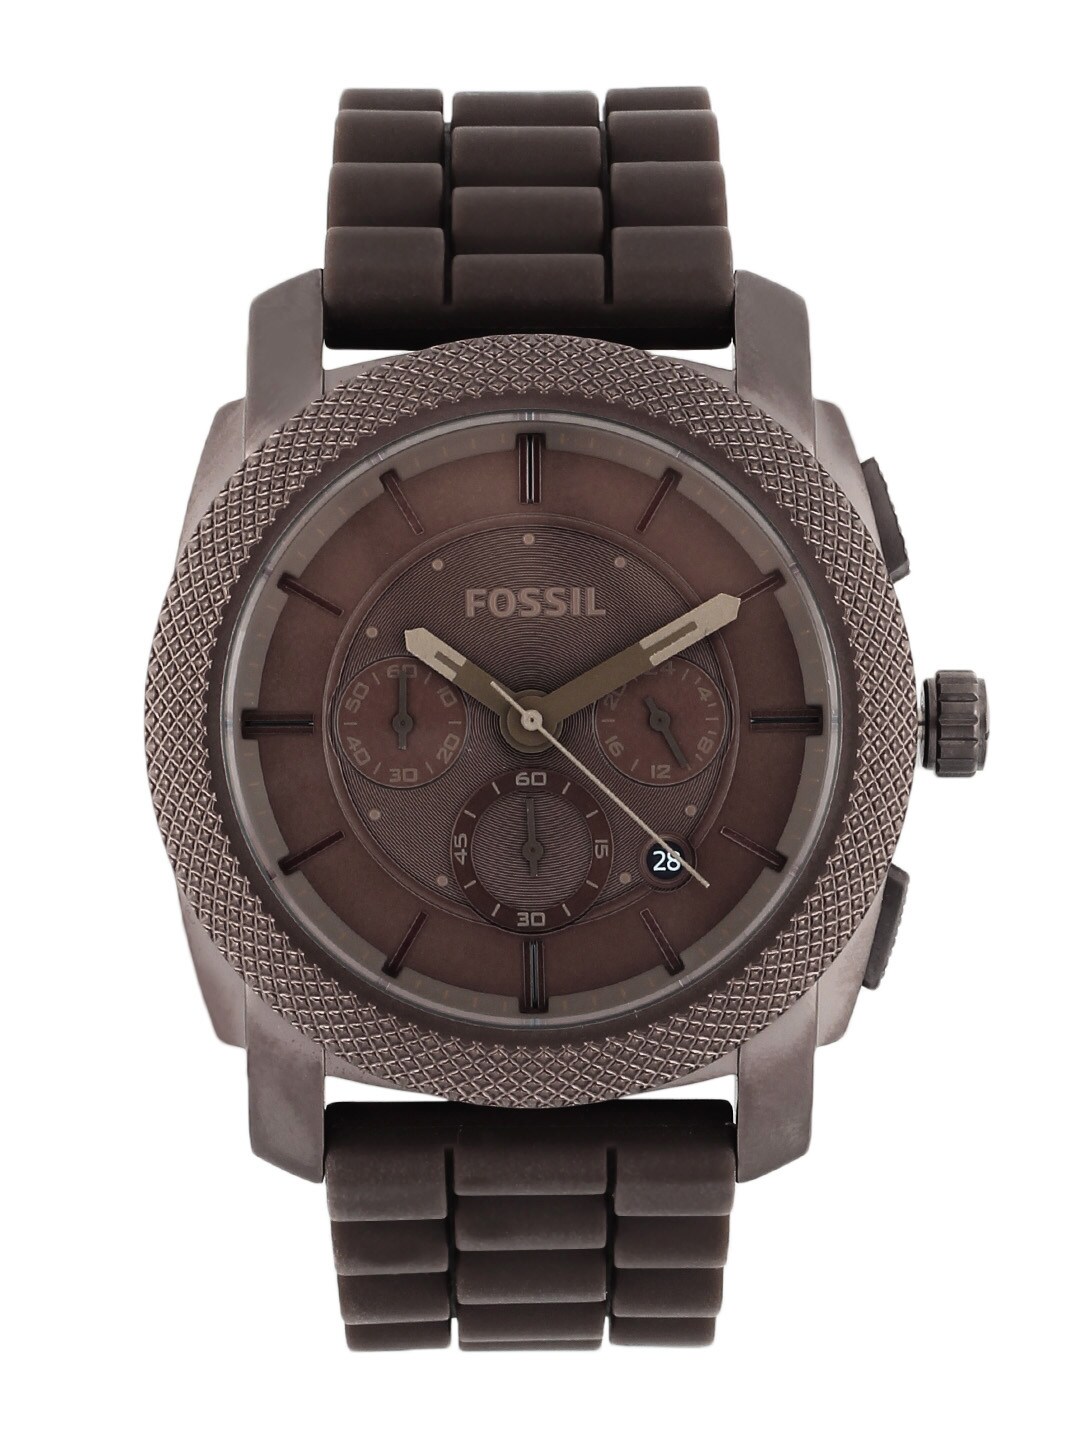 Fossil Men Brown Dial Chronograph Watch FS4702